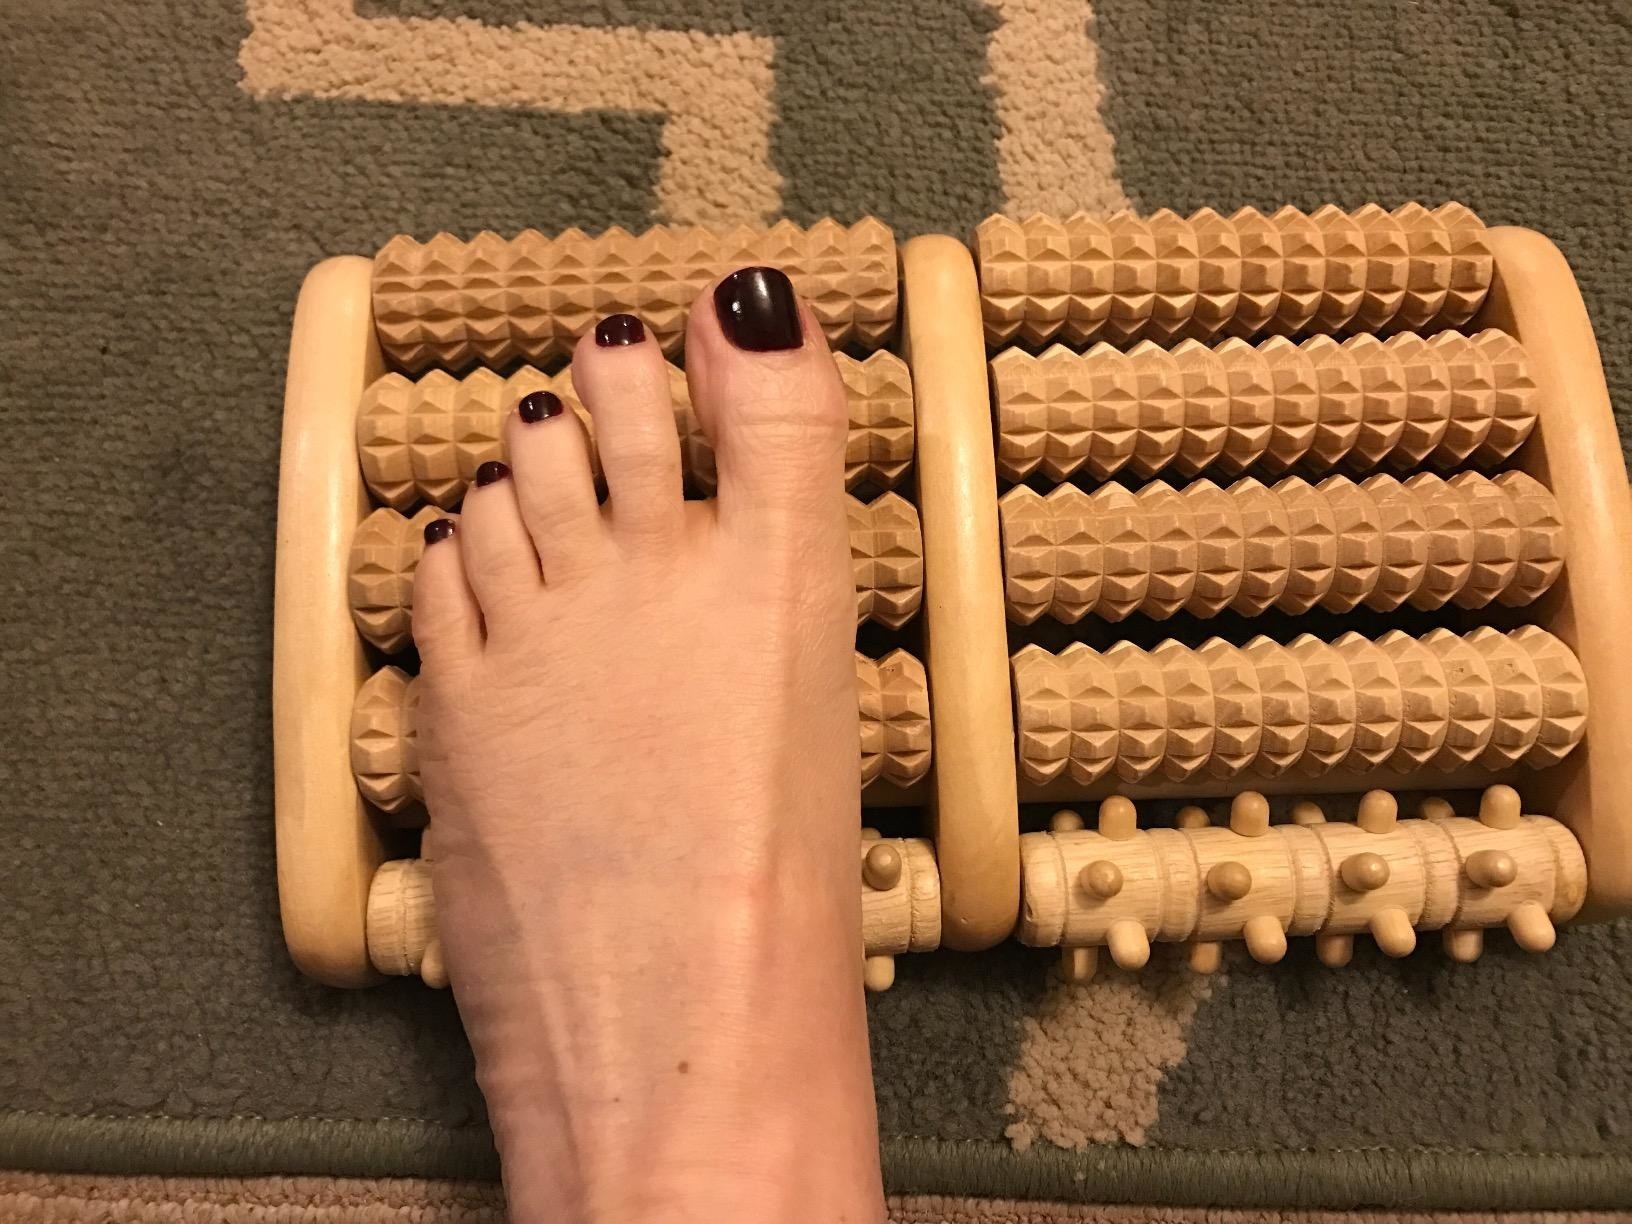 Reviewer using the rolling foot massager